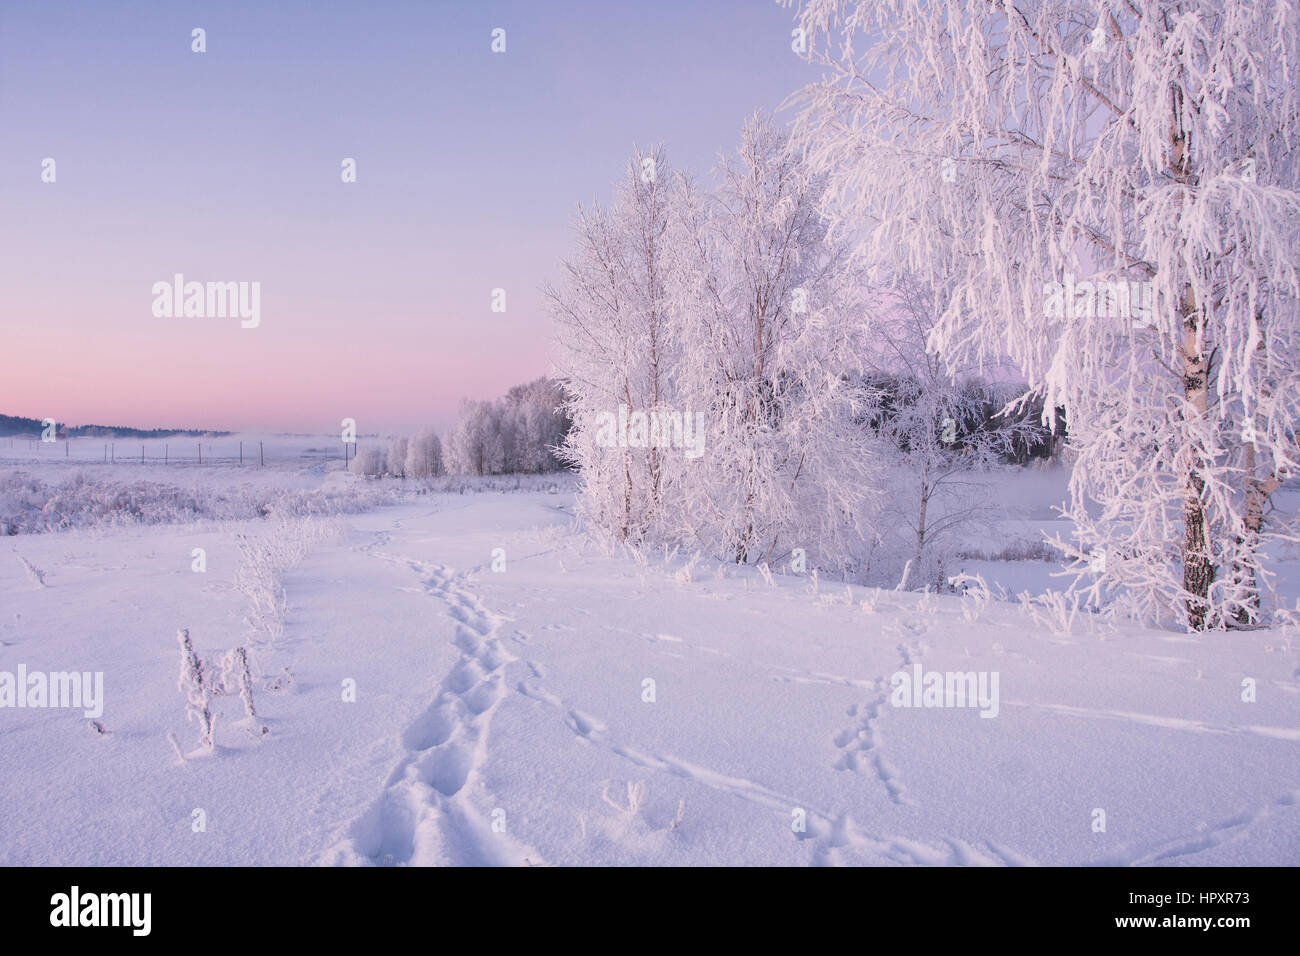 White frosty winter morning with frozen birches on snowy field Stock Photo